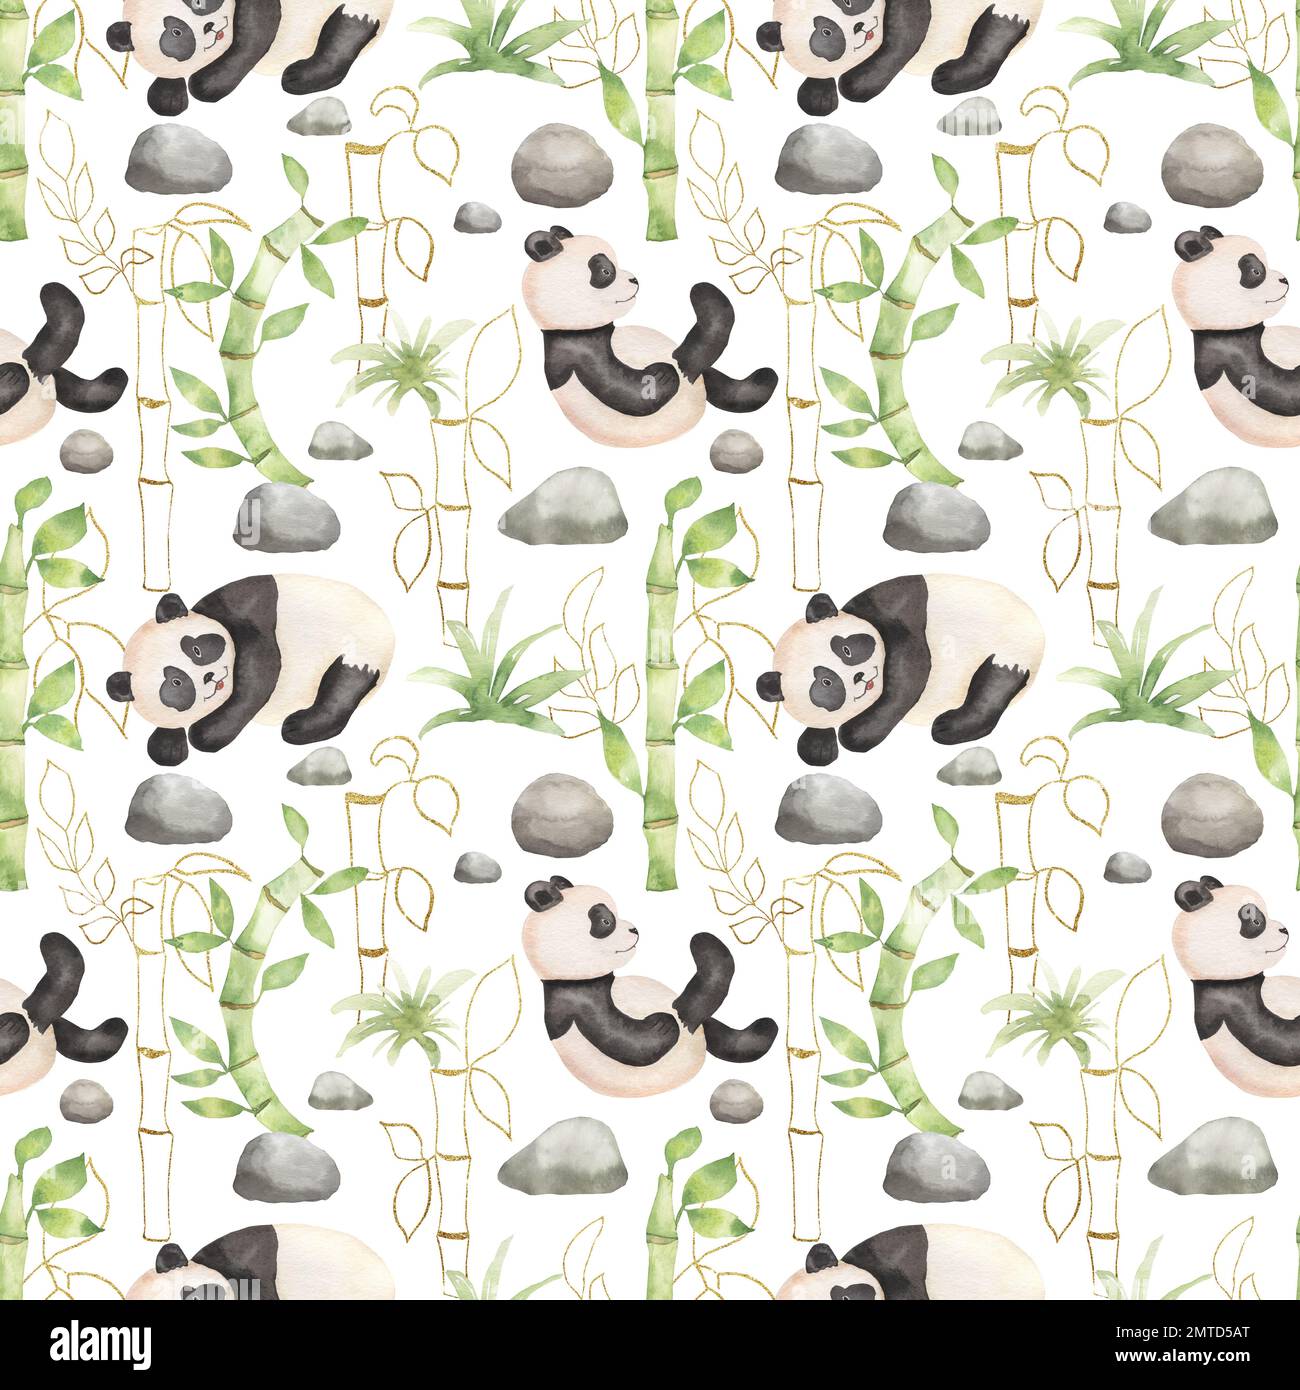 Watercolor cute panda with florals illustration isolated on white background. Seamless pattern of black and white panda animal, stone, green bamboo le Stock Photo